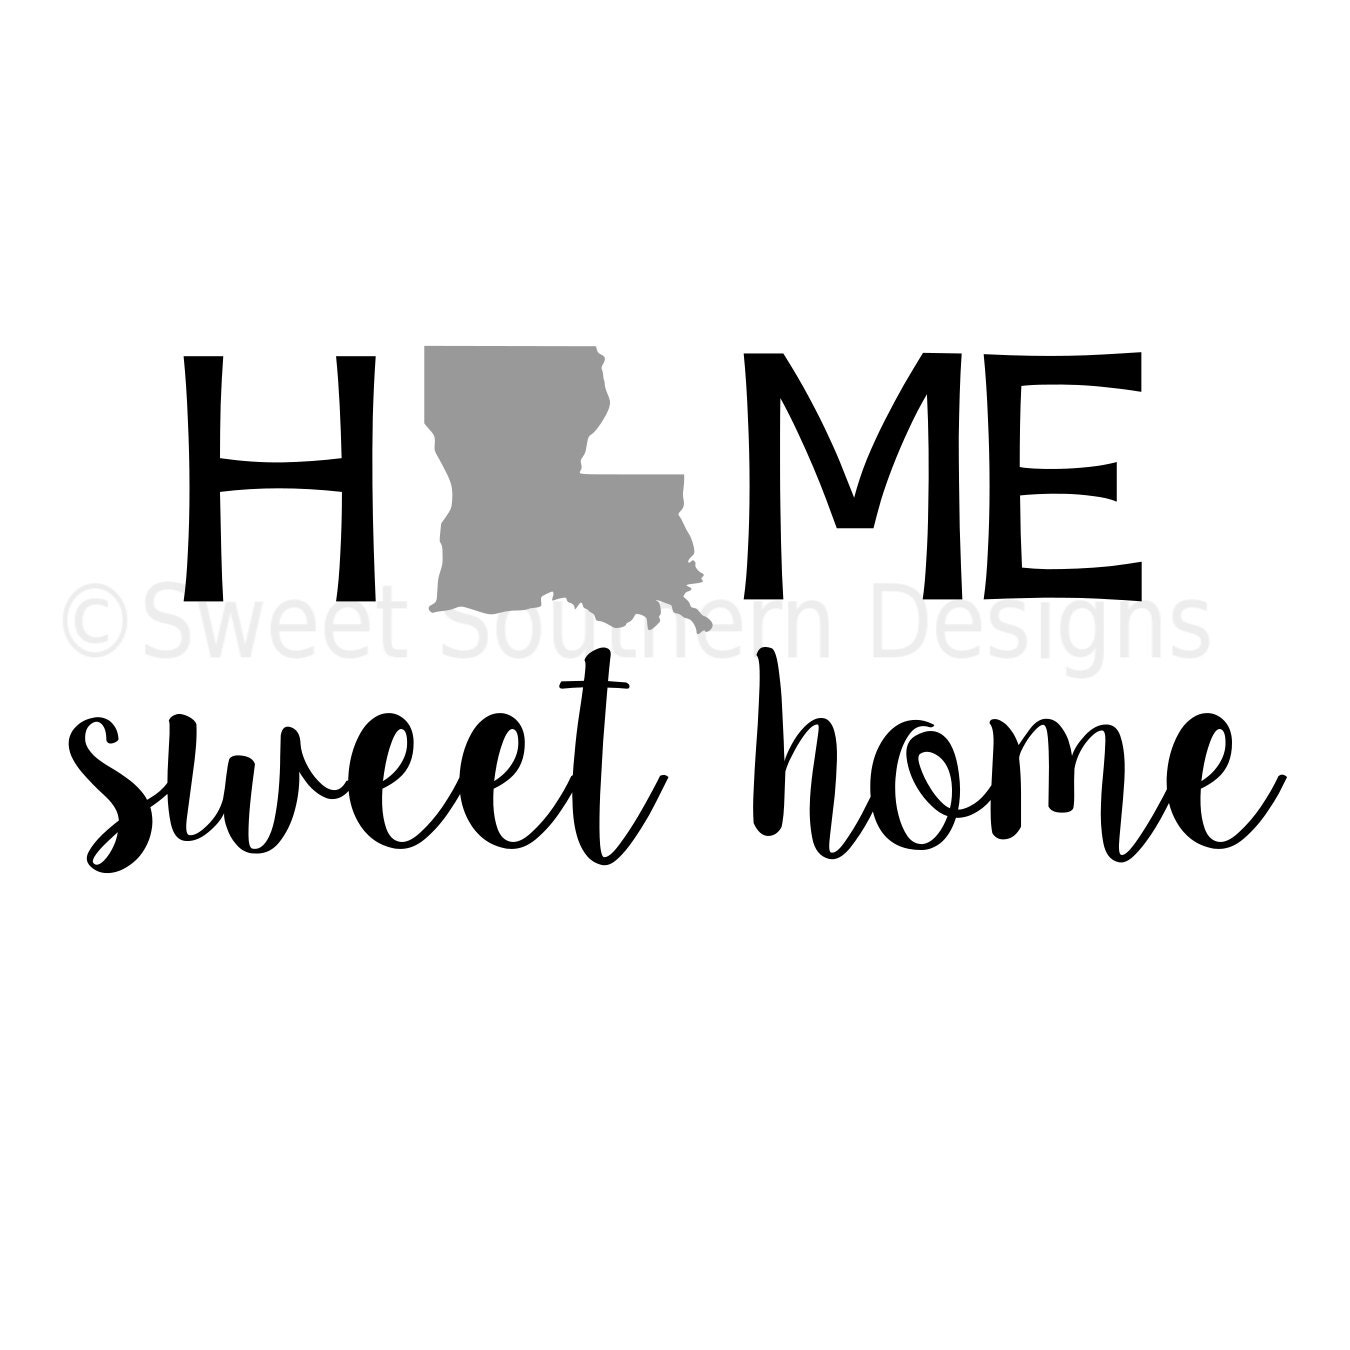 Download Home sweet home Louisiana DXF SVG instant download design for